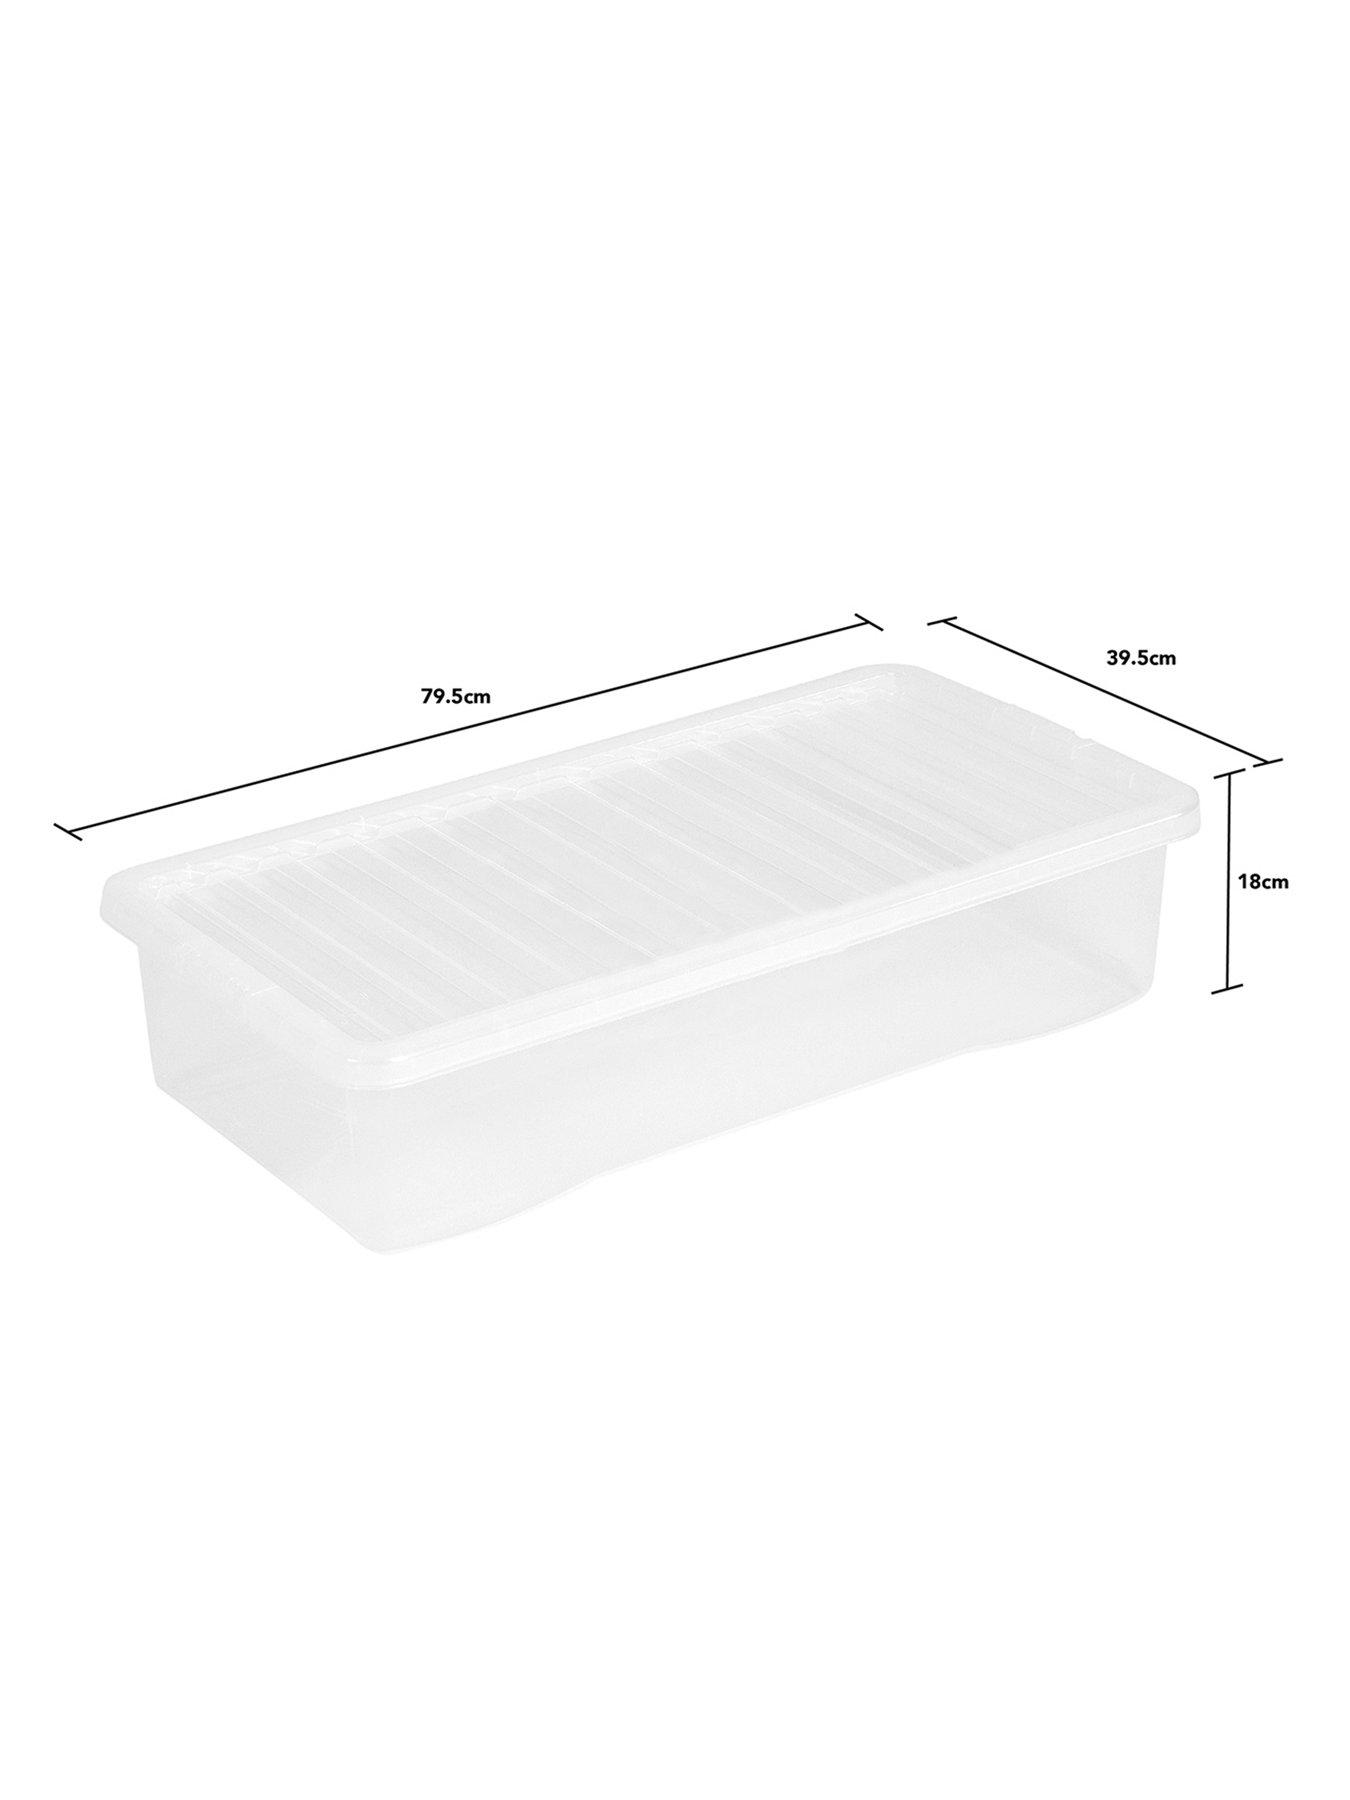 32 Litre Plastic Under Bed Storage Box With Wheels And Folding Lid ...